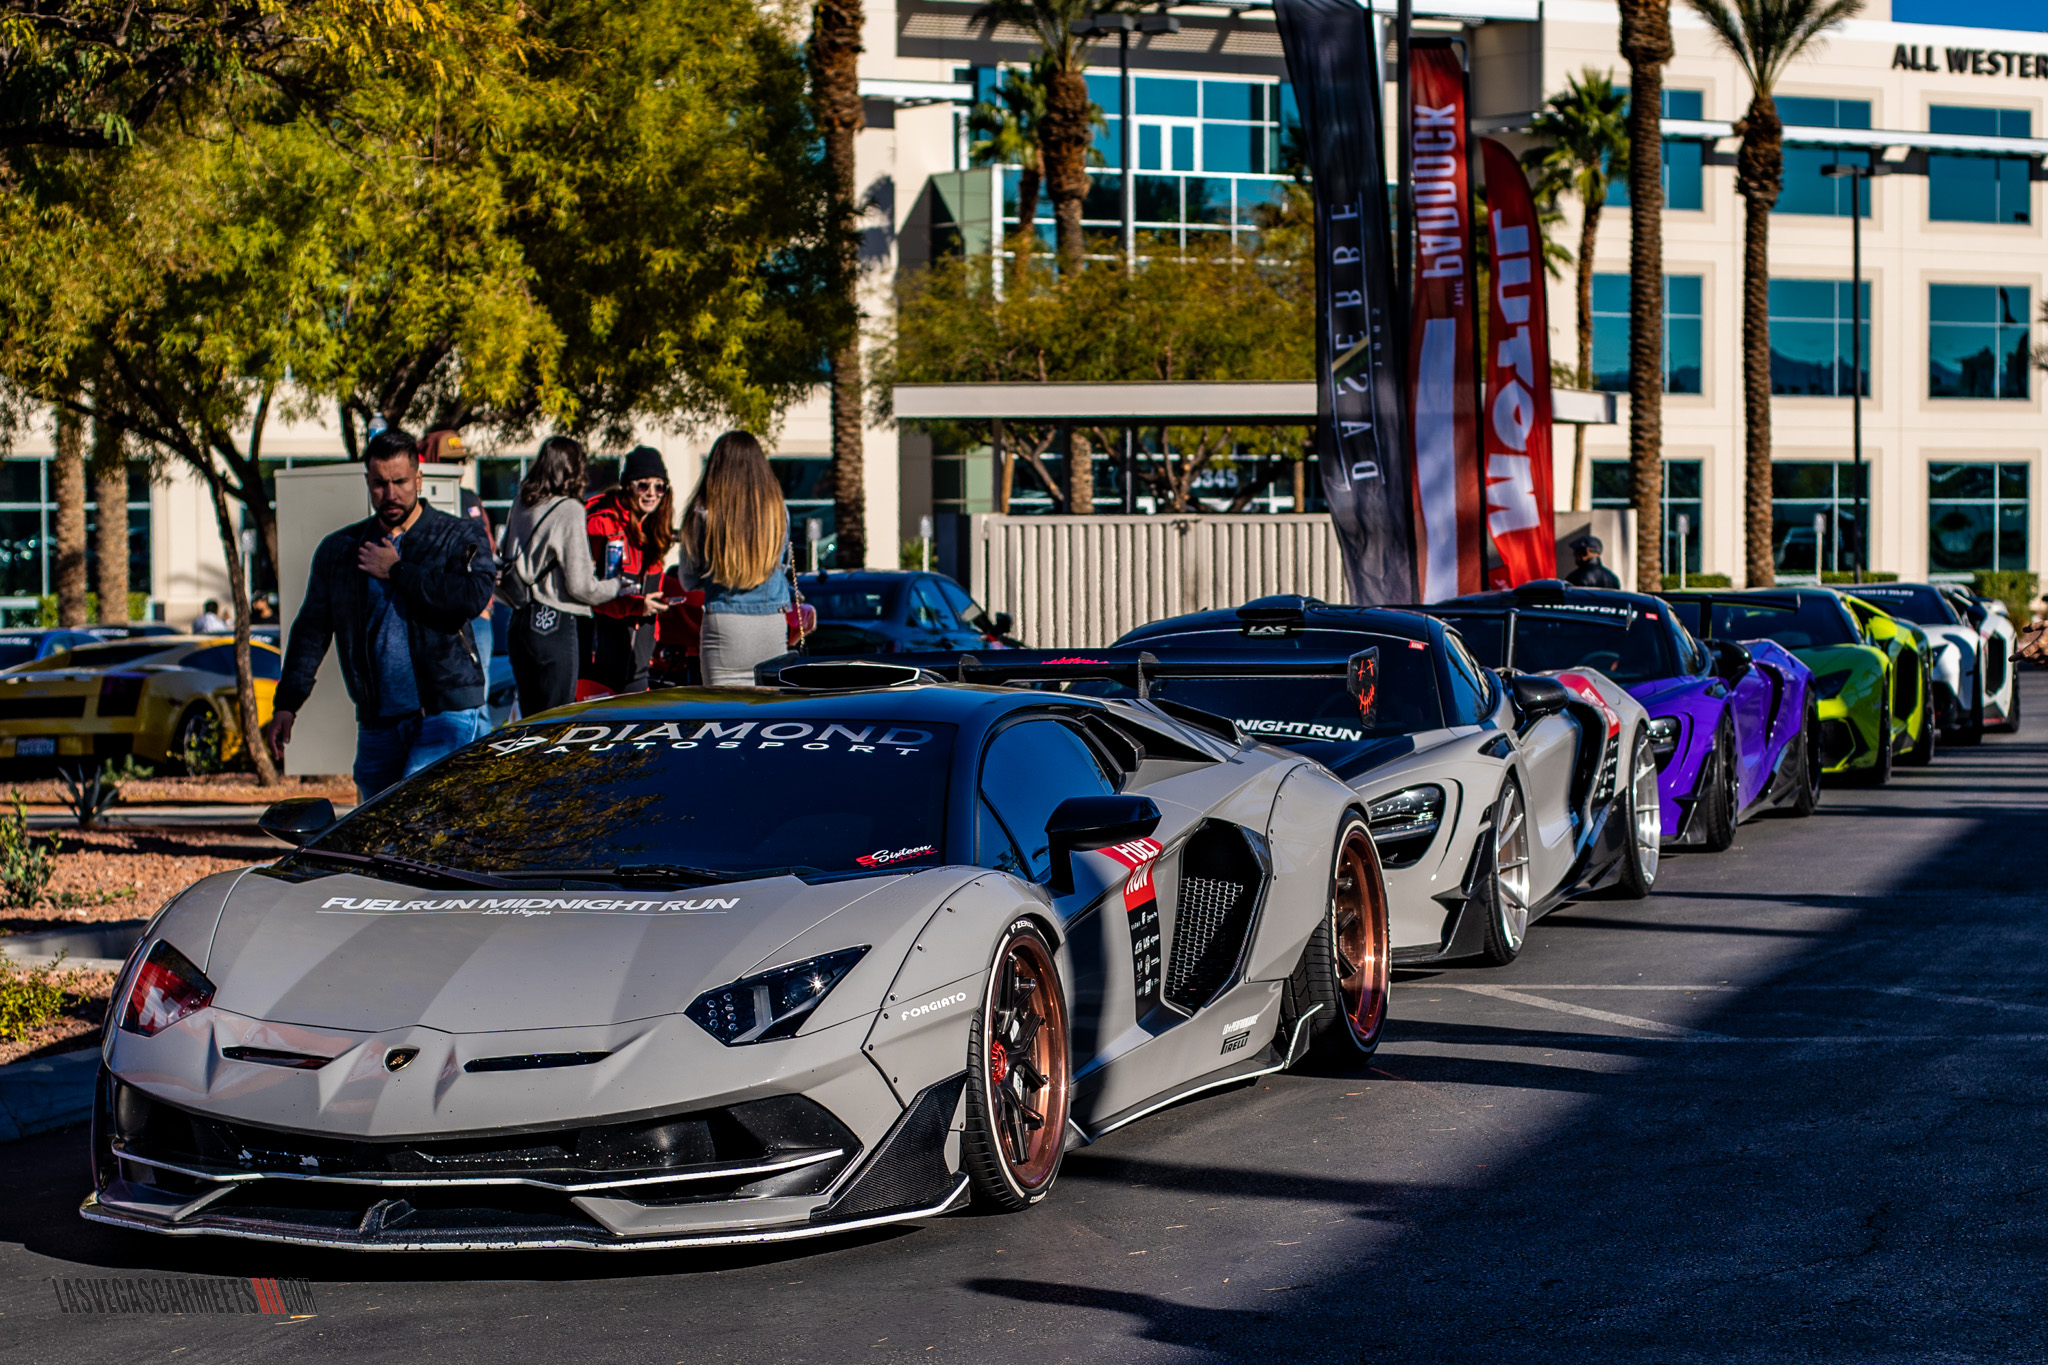 Fuel Run exotic car rally comes to show off a lil’ in Las Vegas